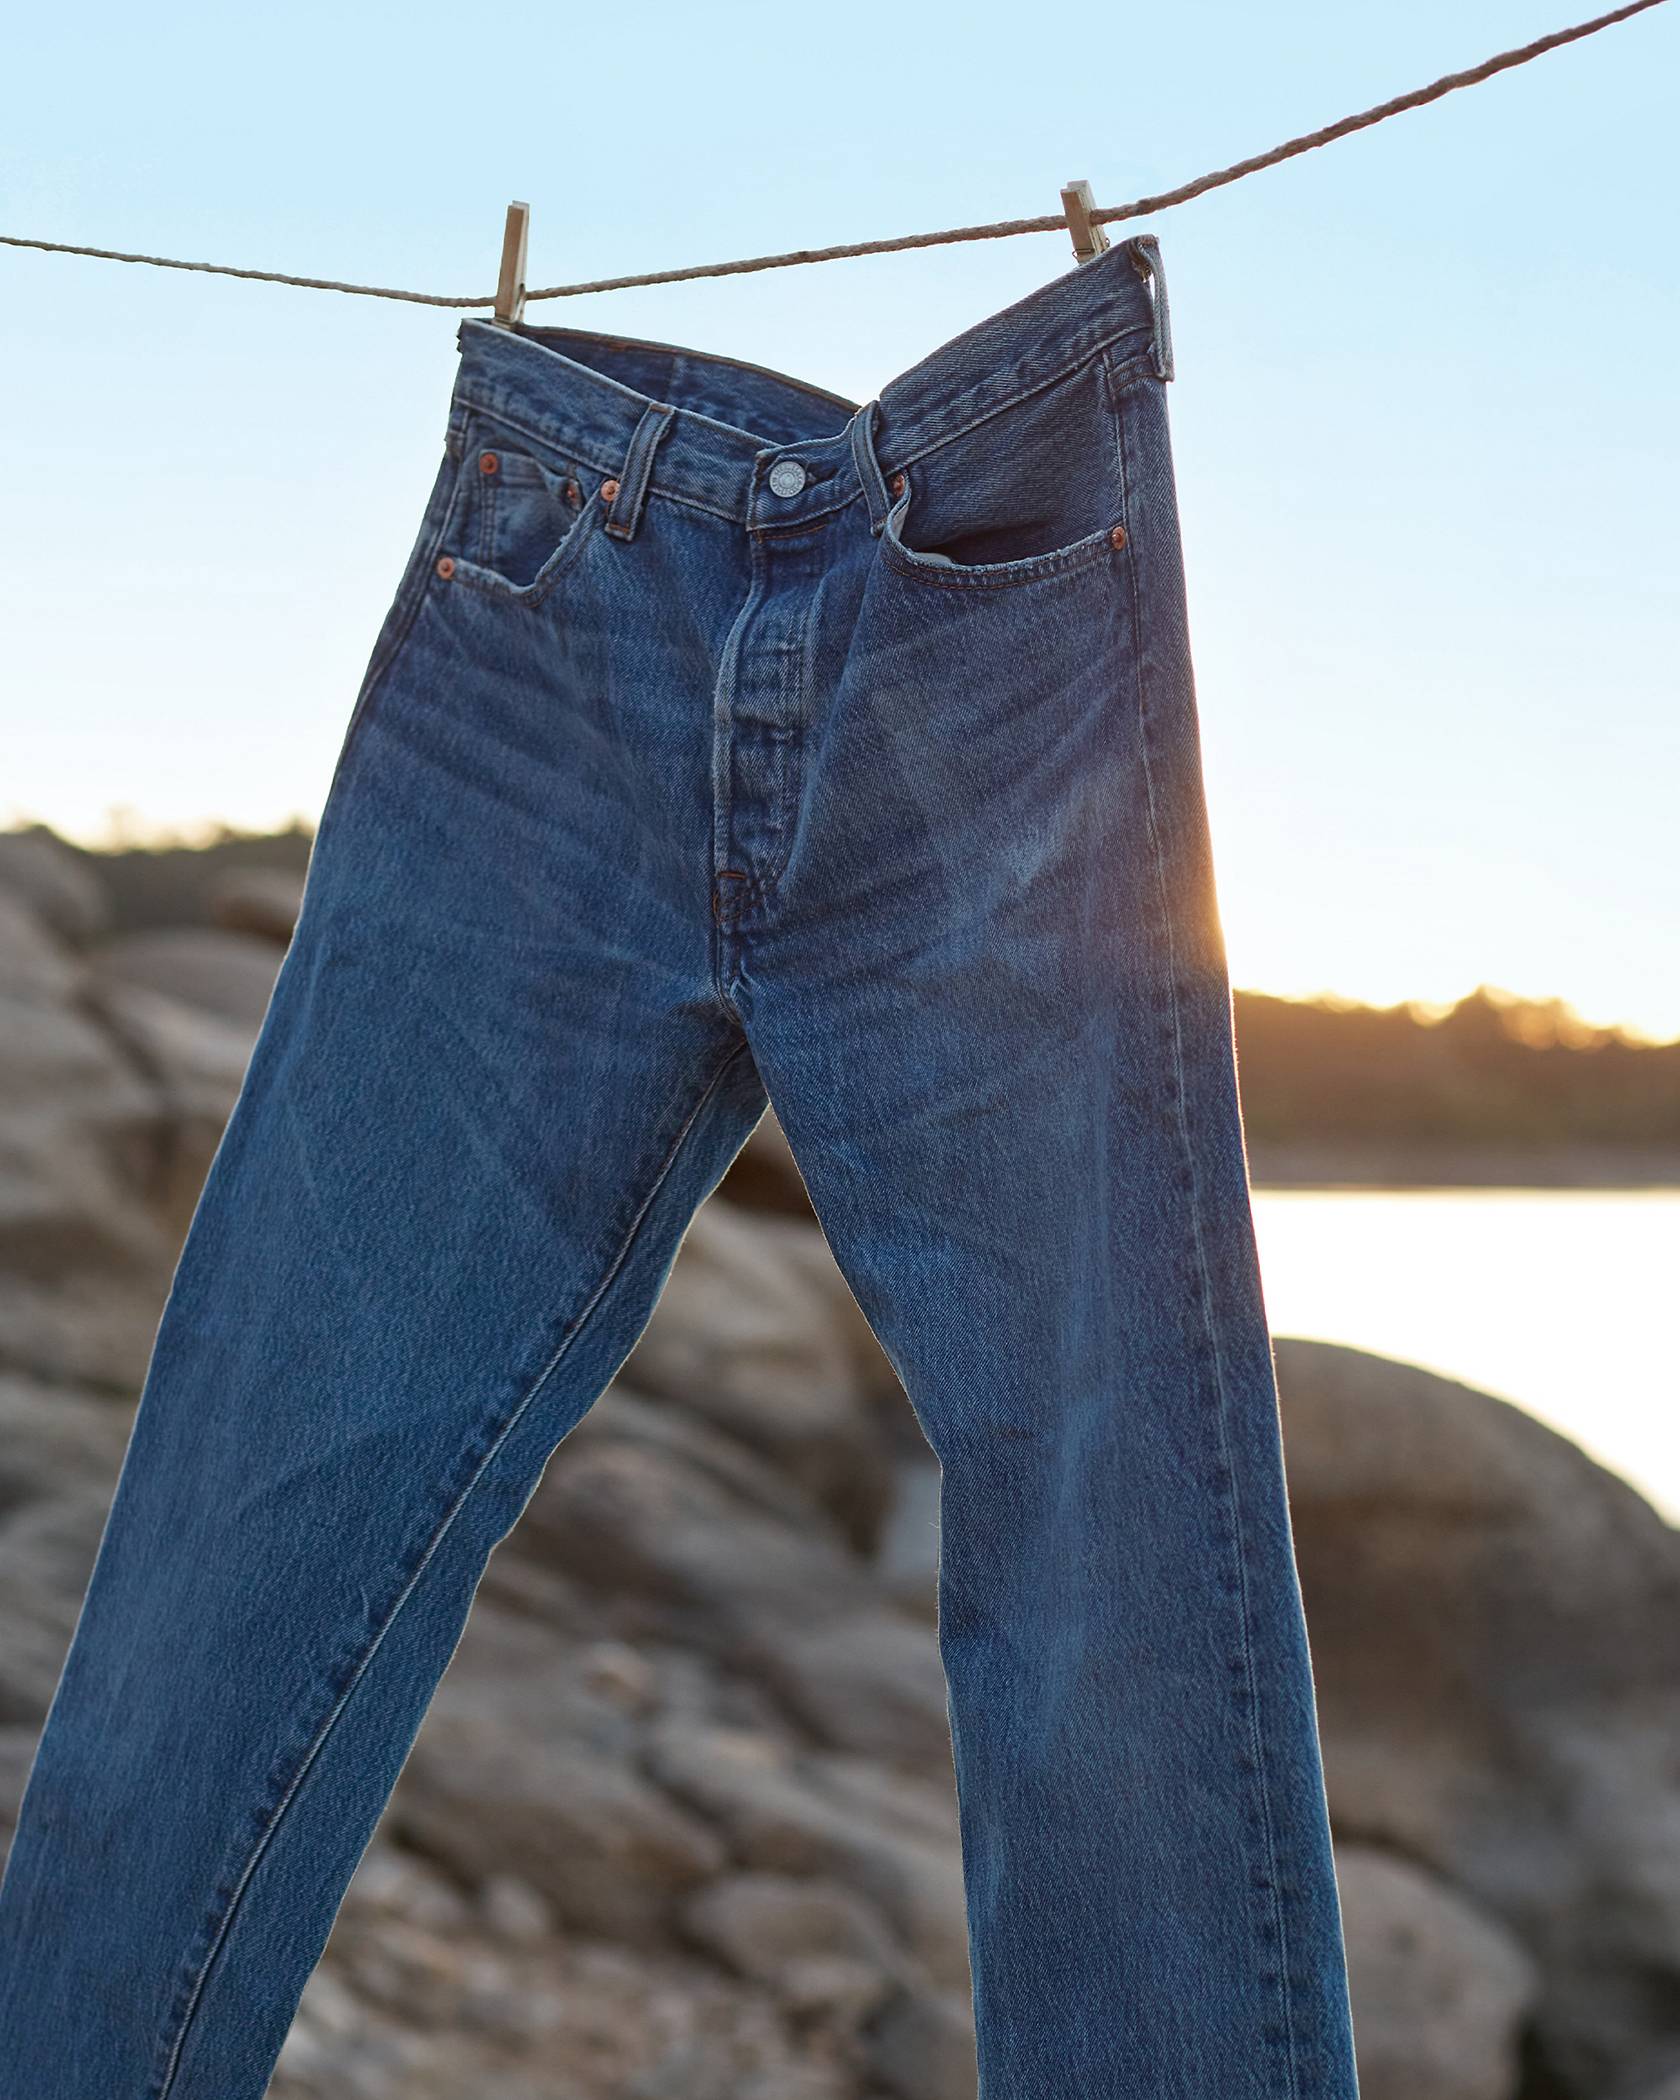 Pair of jeans hanging on a clothesline